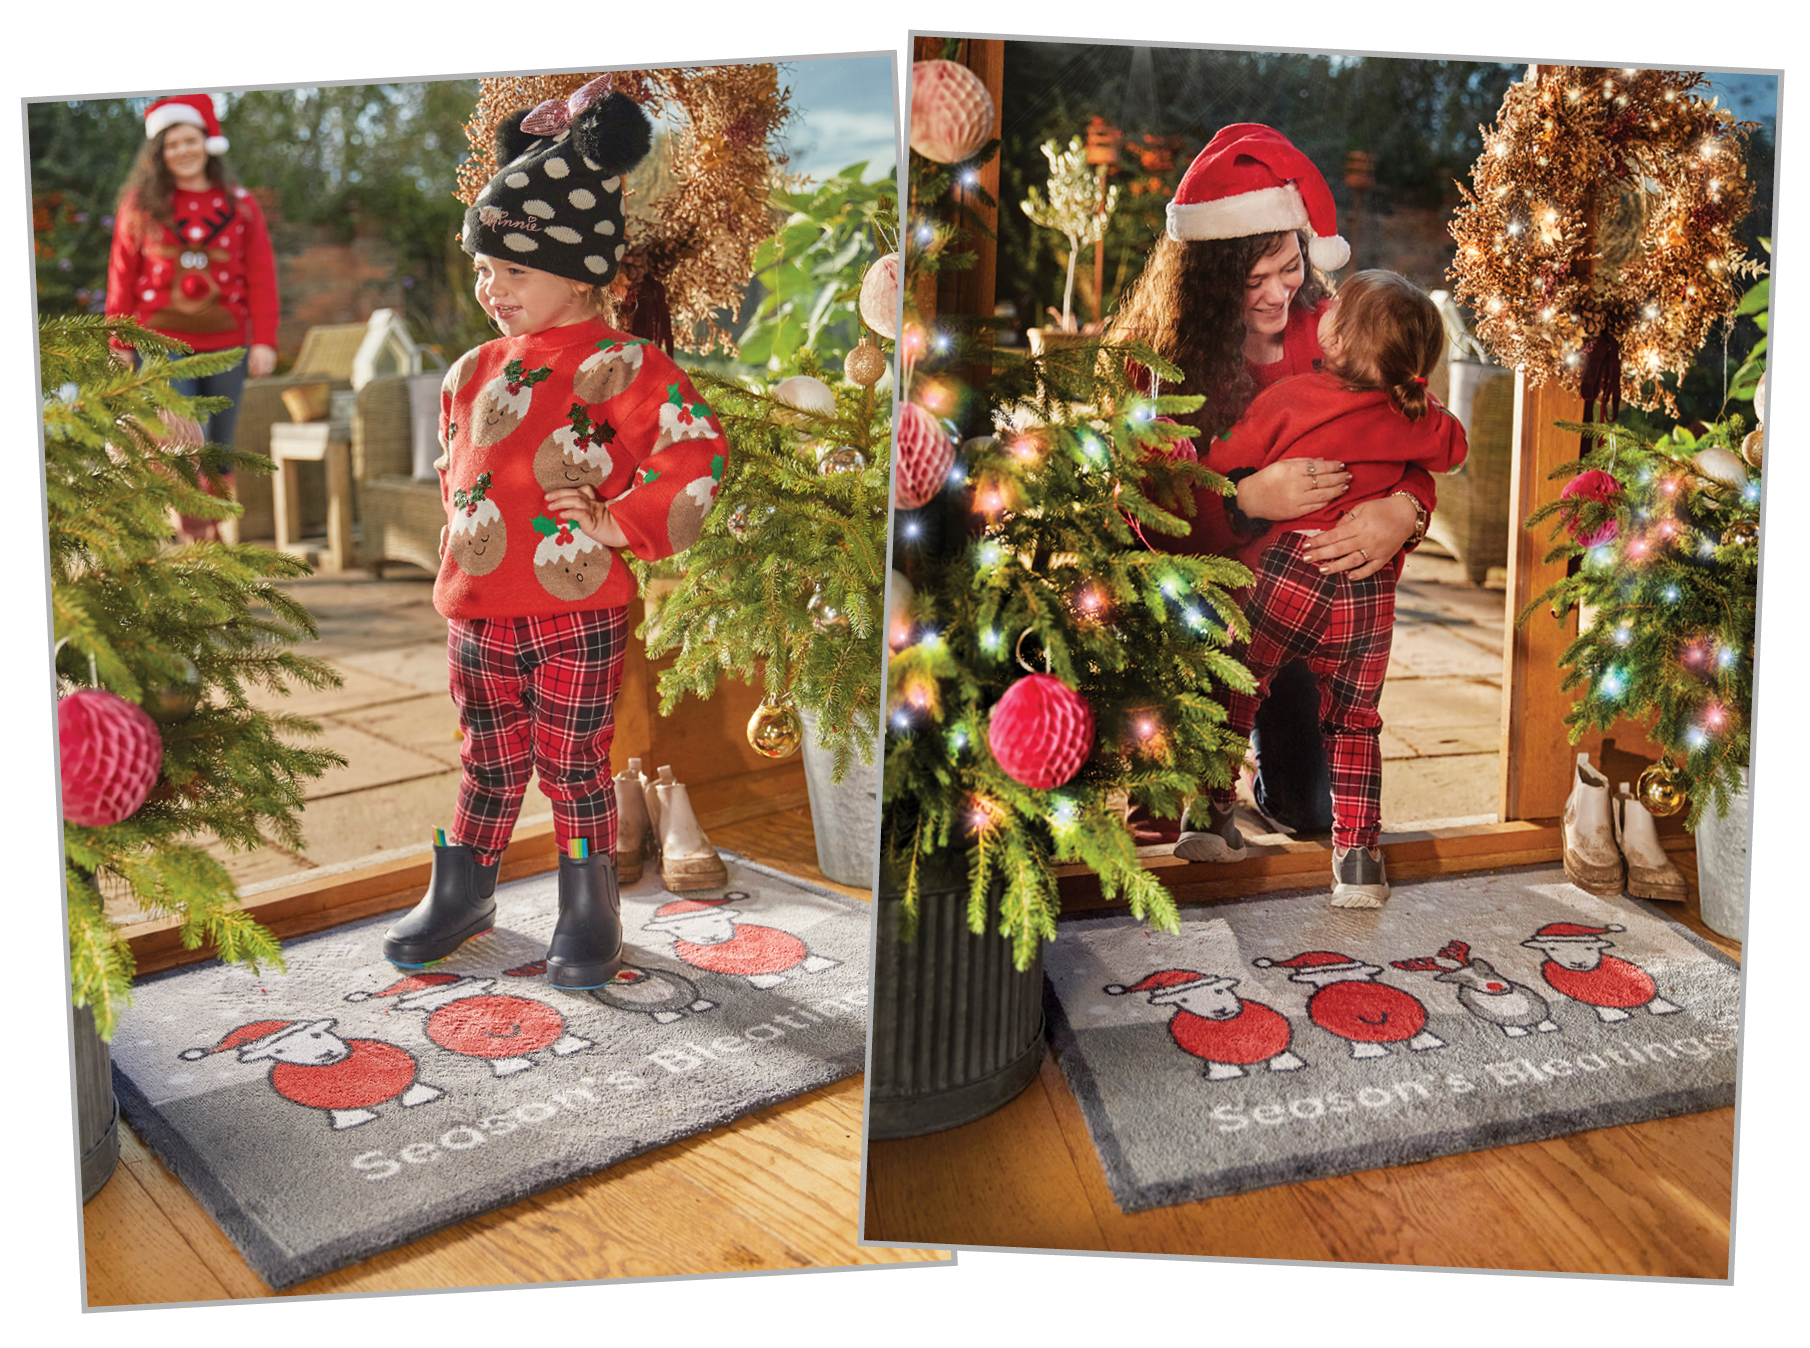 Two images of children dressed in Christmas pyjamas standing on Herdy rugs